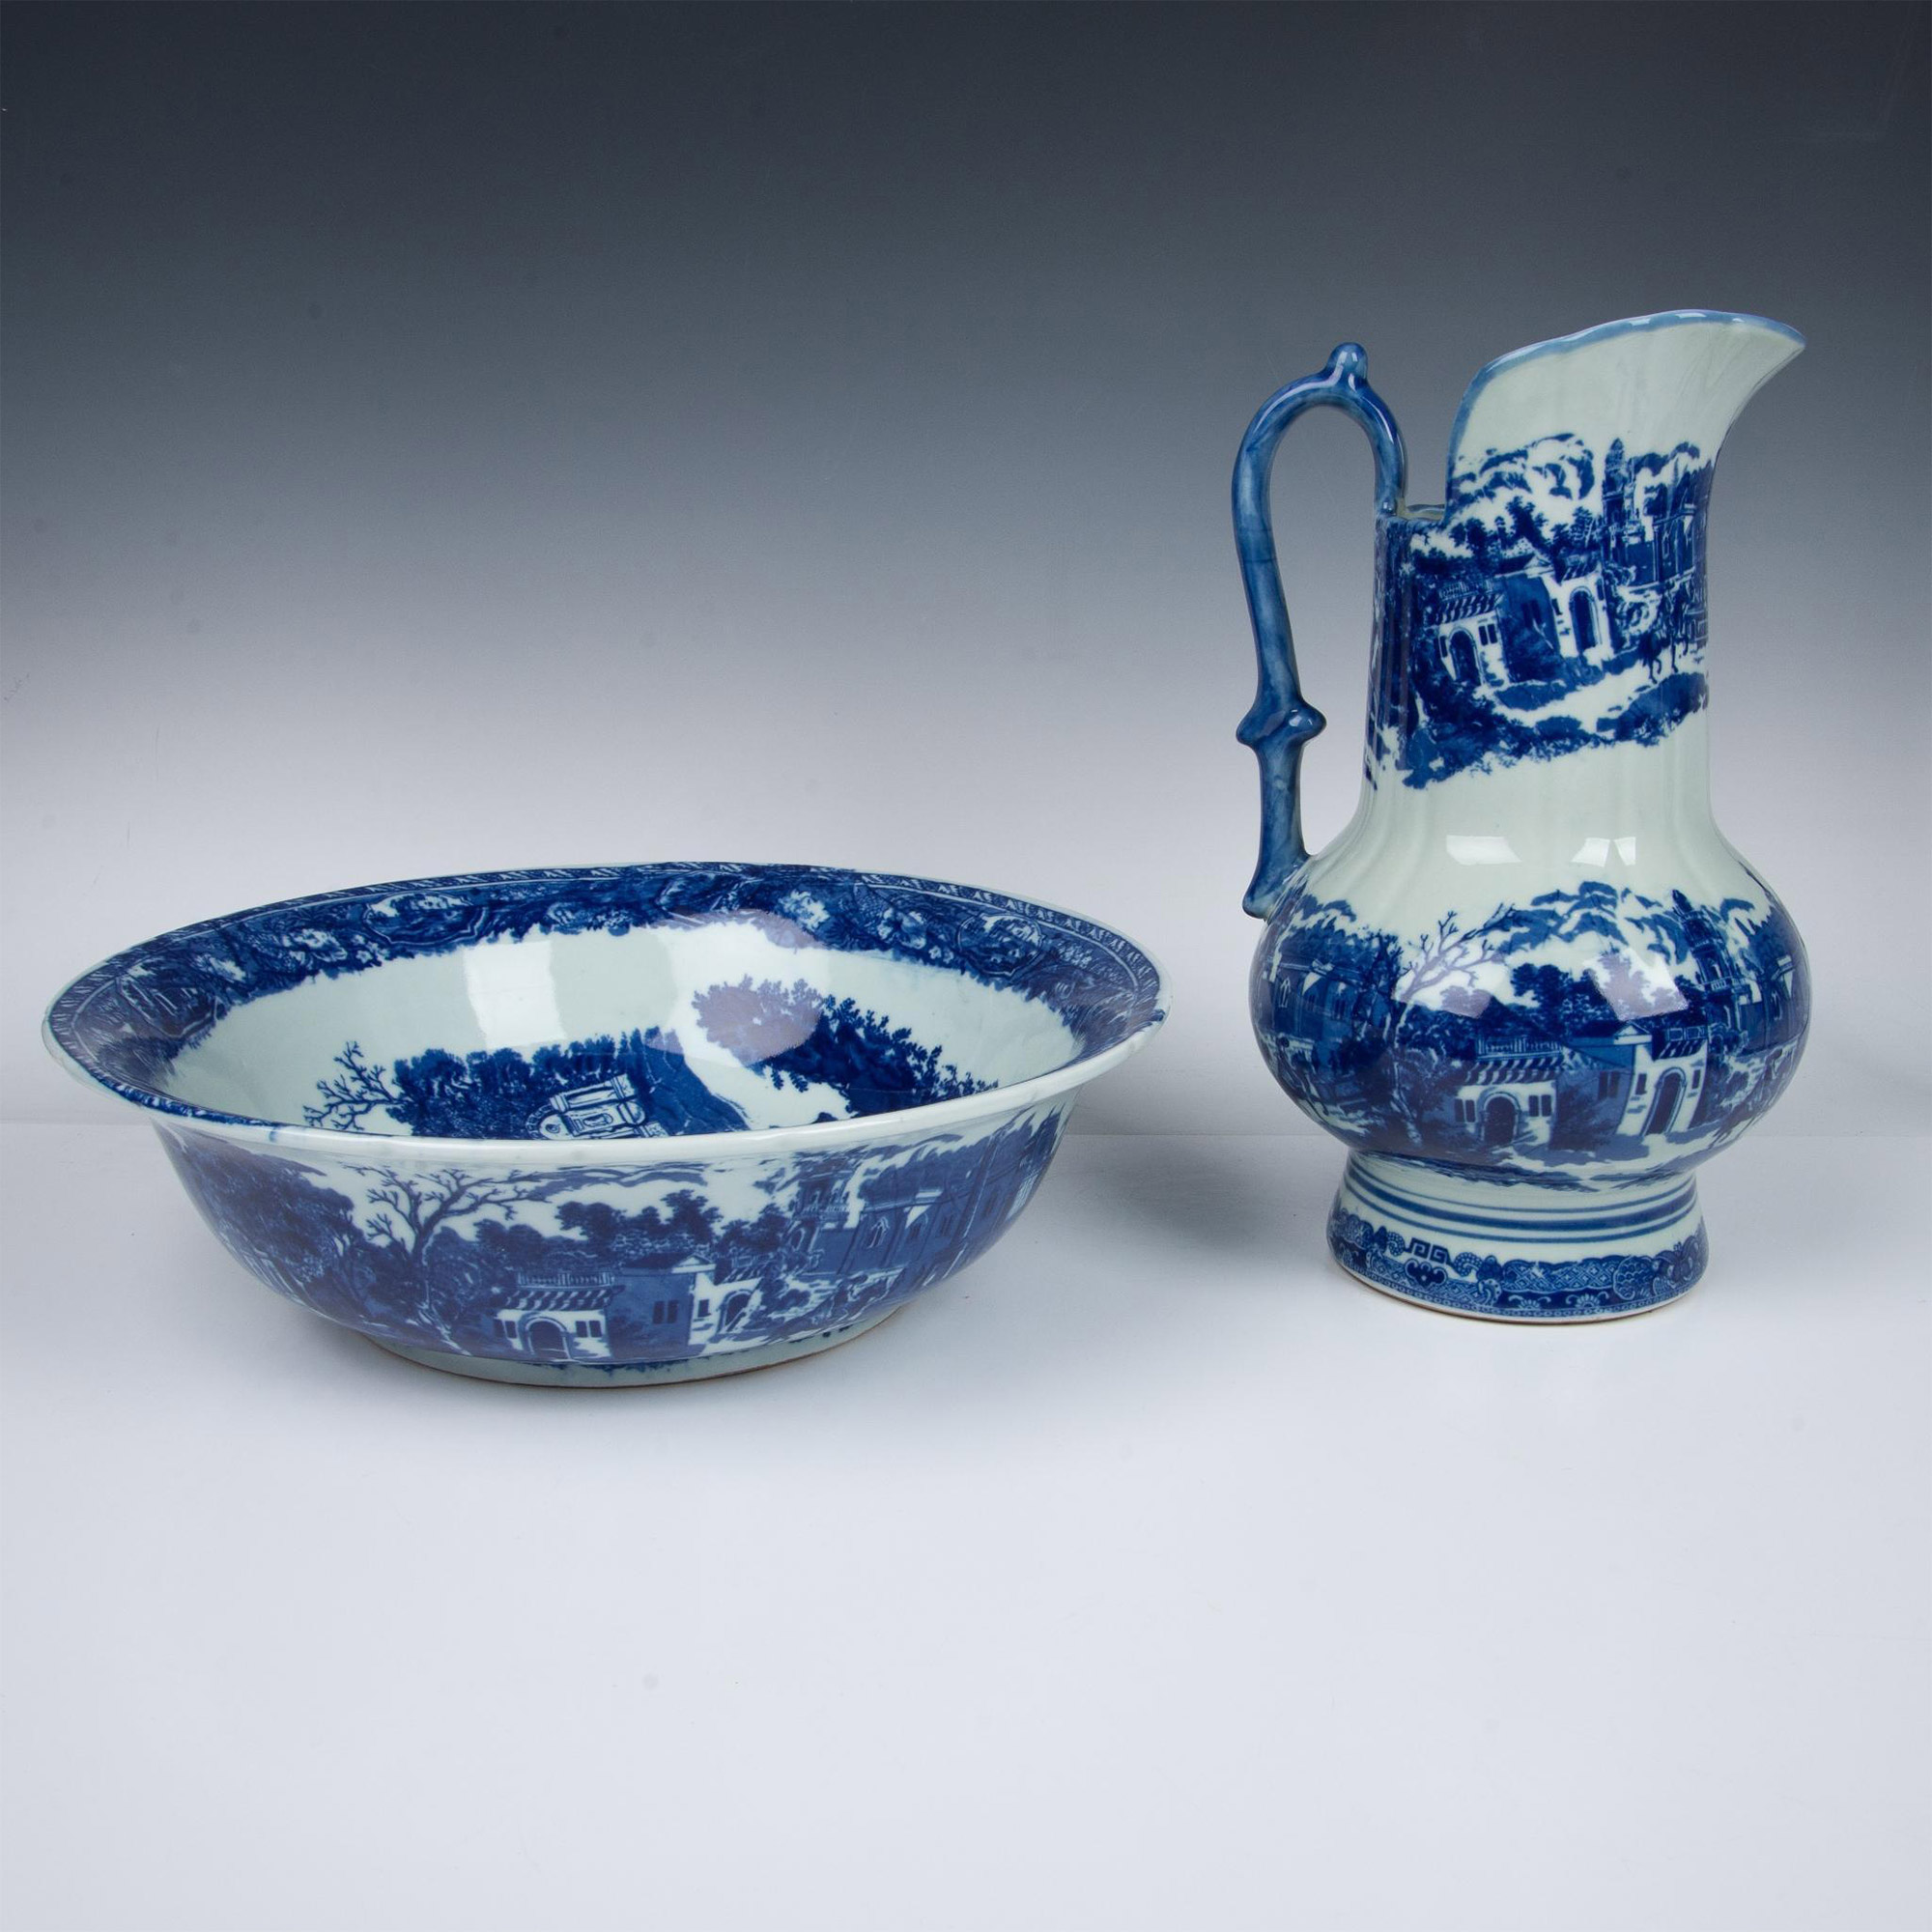 2pc Victoria Ware Ironstone Blue and White Pitcher and Bowl - Image 3 of 5